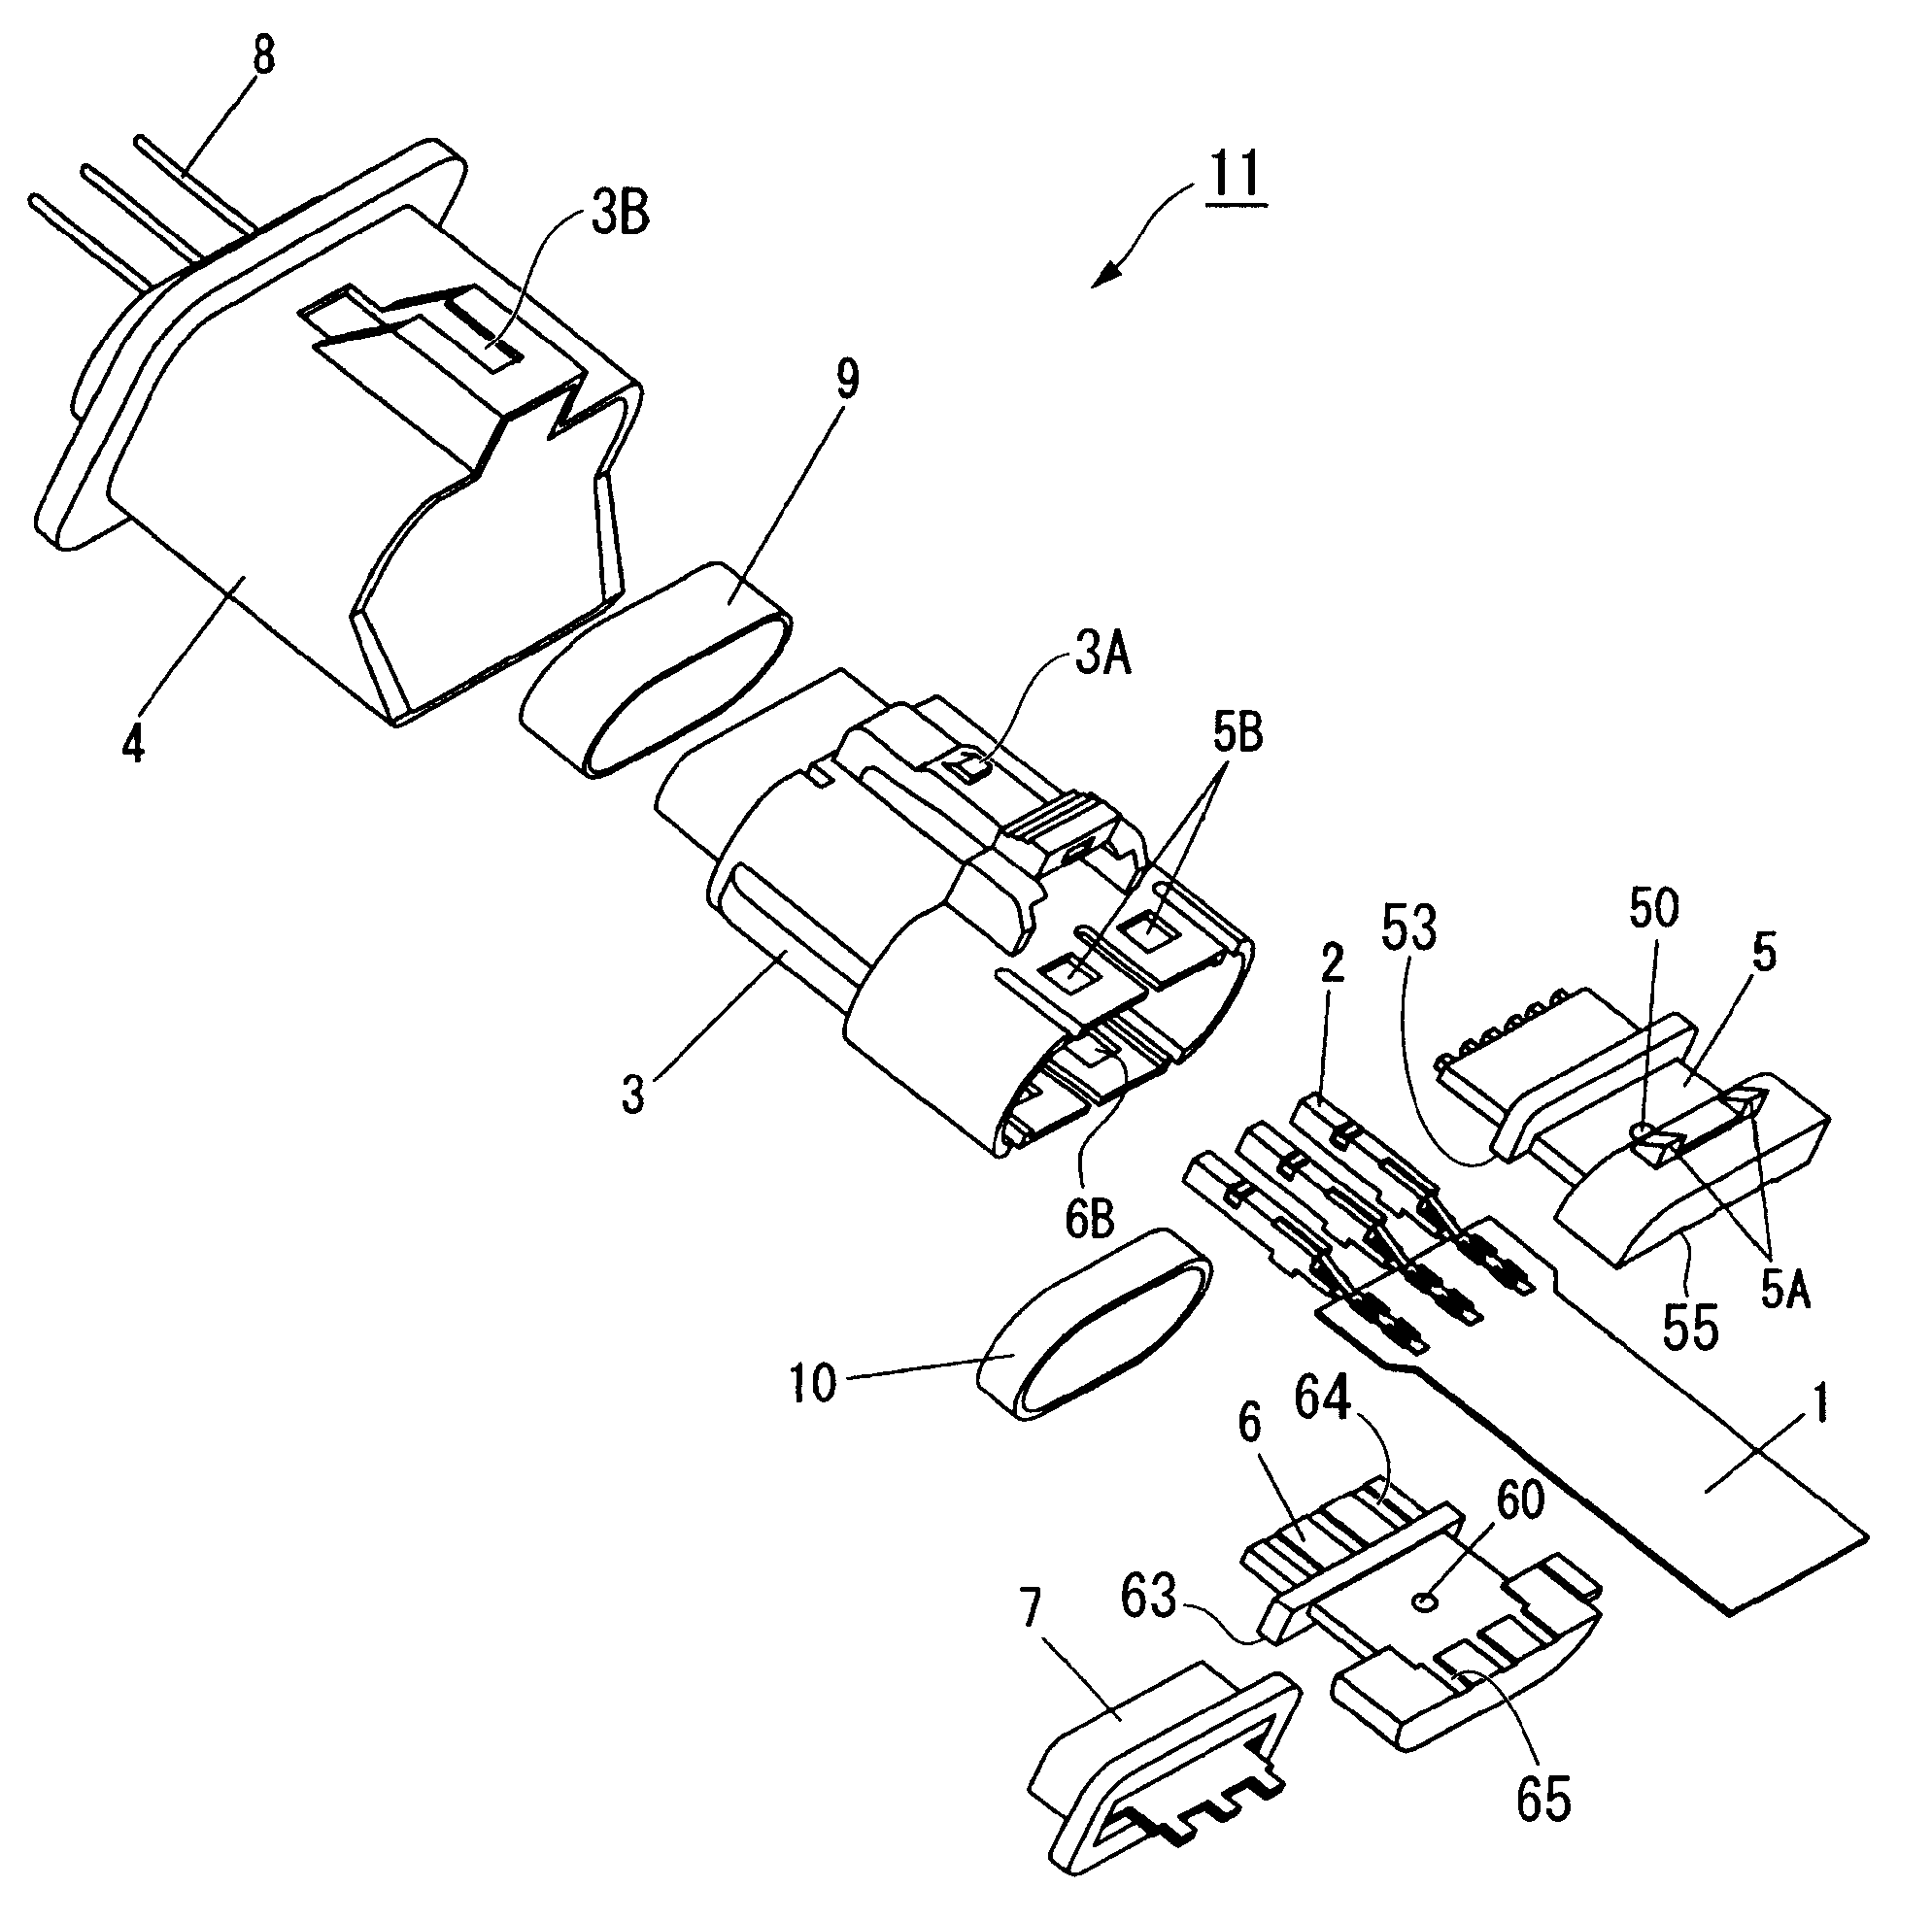 Waterproof connector for flexible substrate